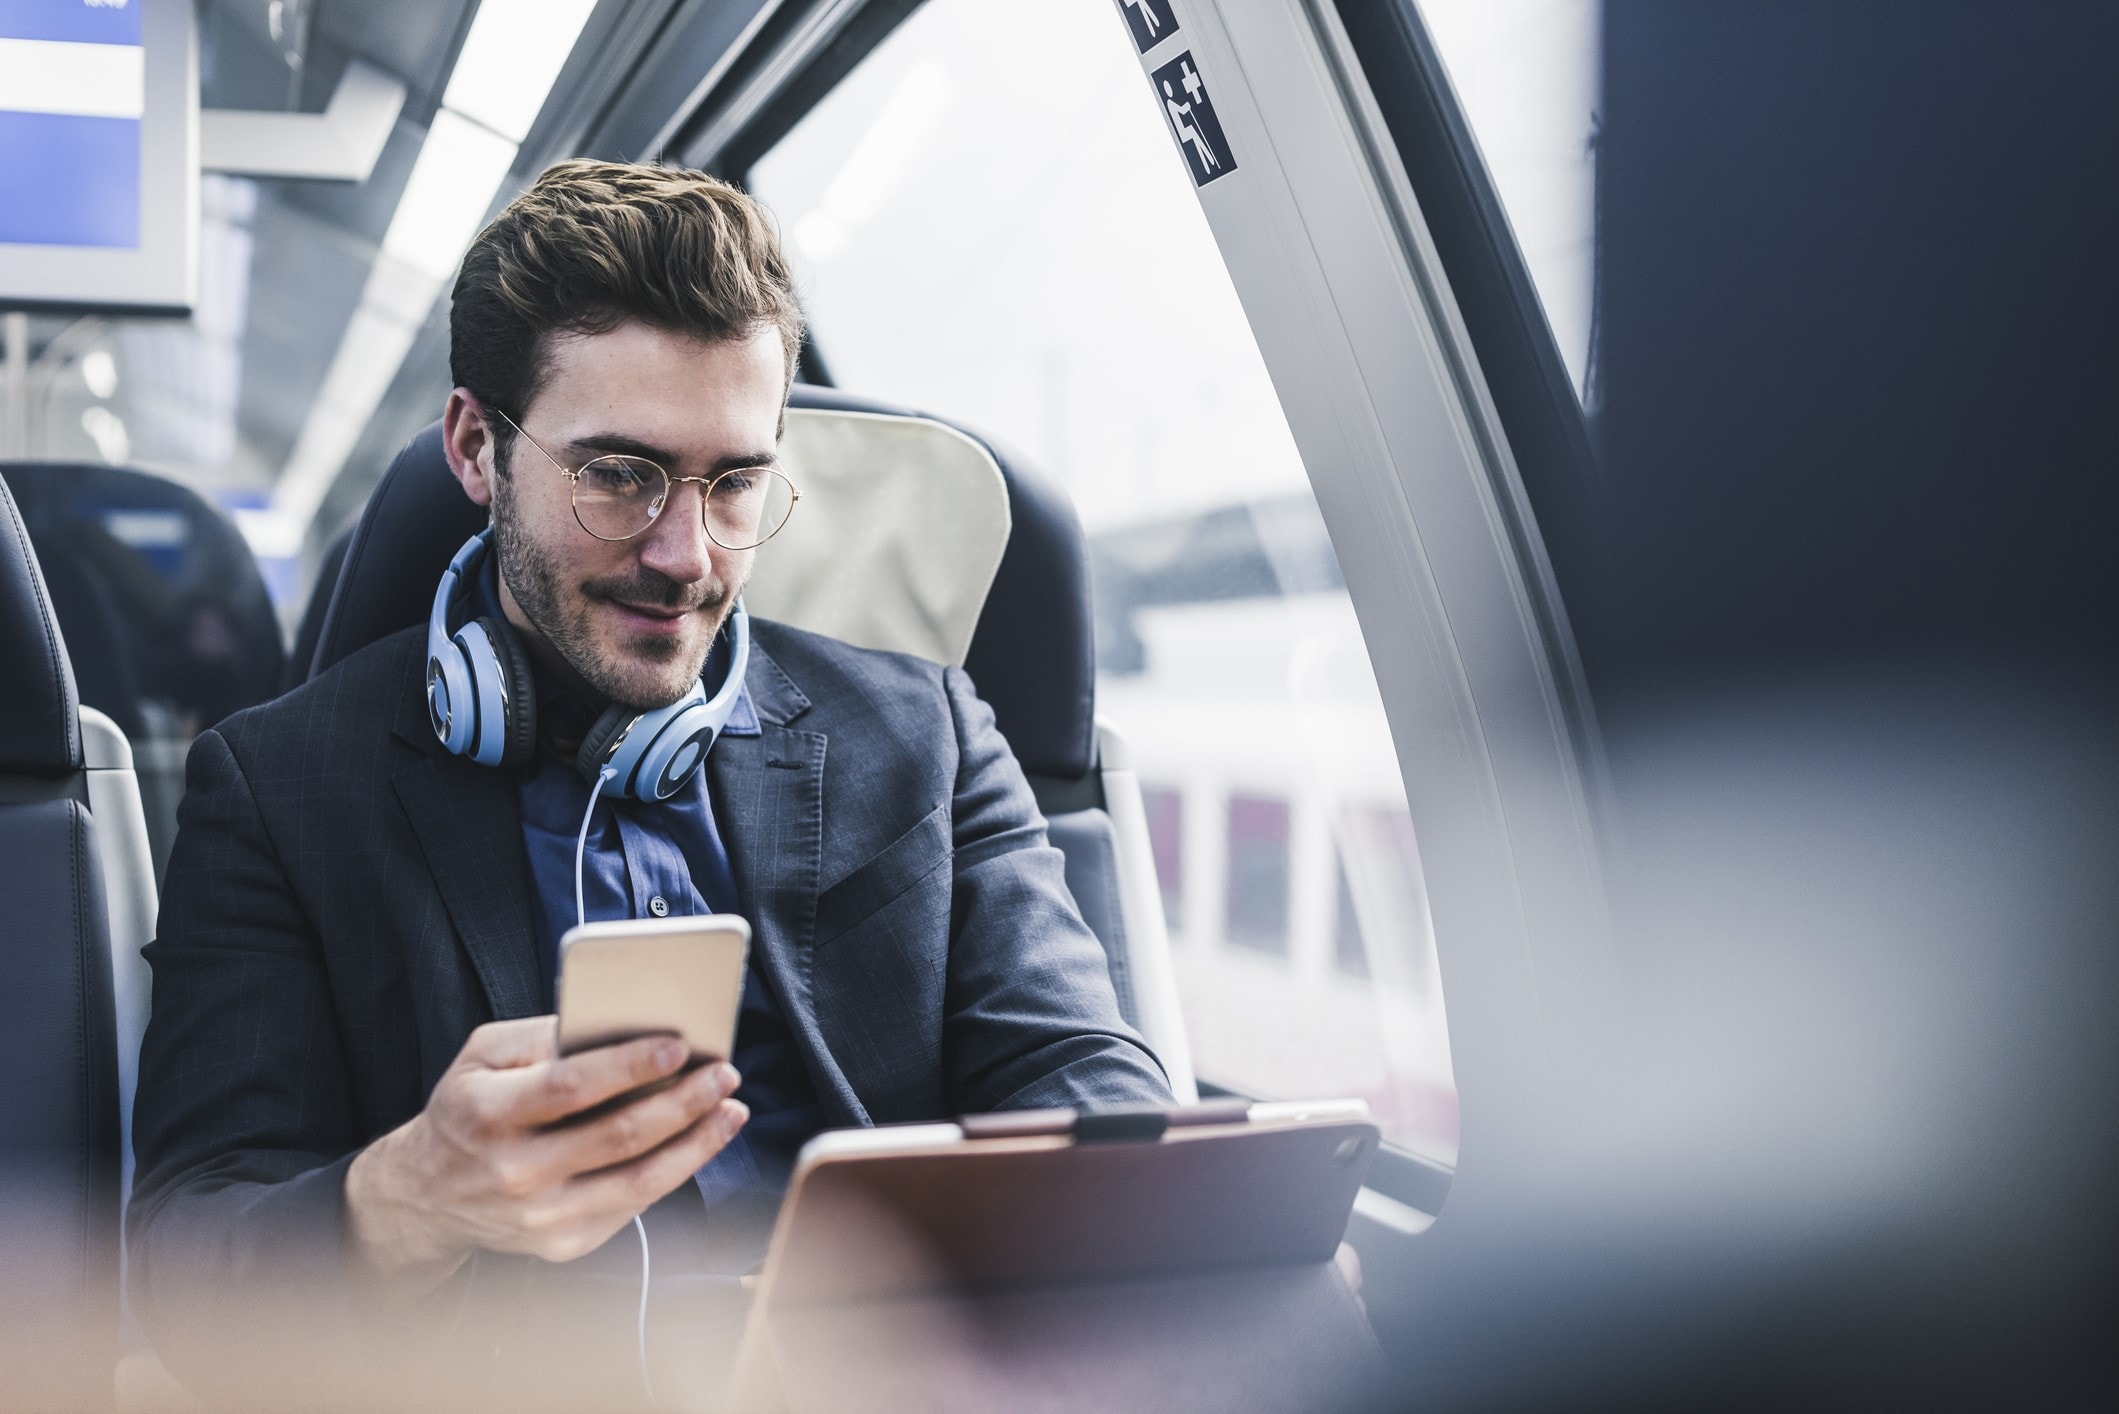 Man with glasses sitting on a train, wearing glasses, holding phone, looking at tablet 